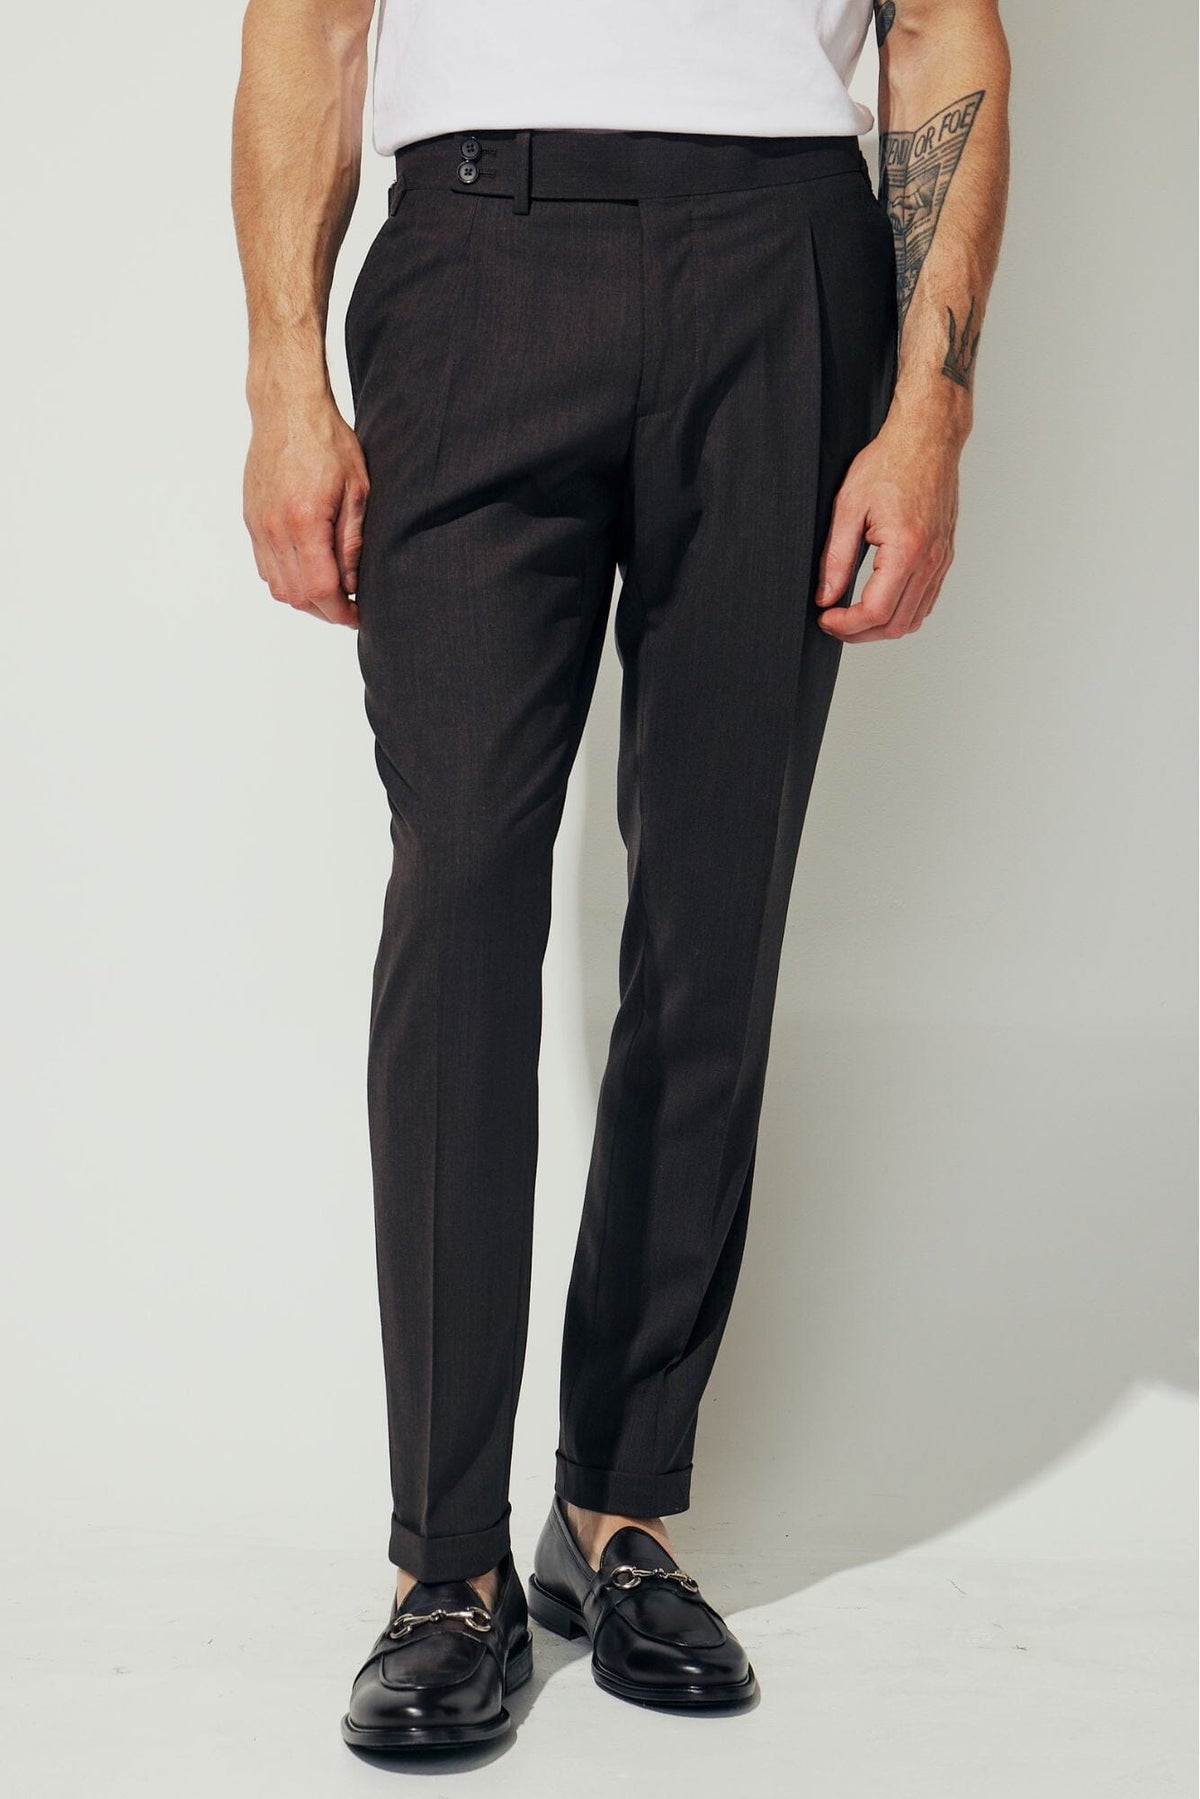 Men's Trousers, Made To Measure